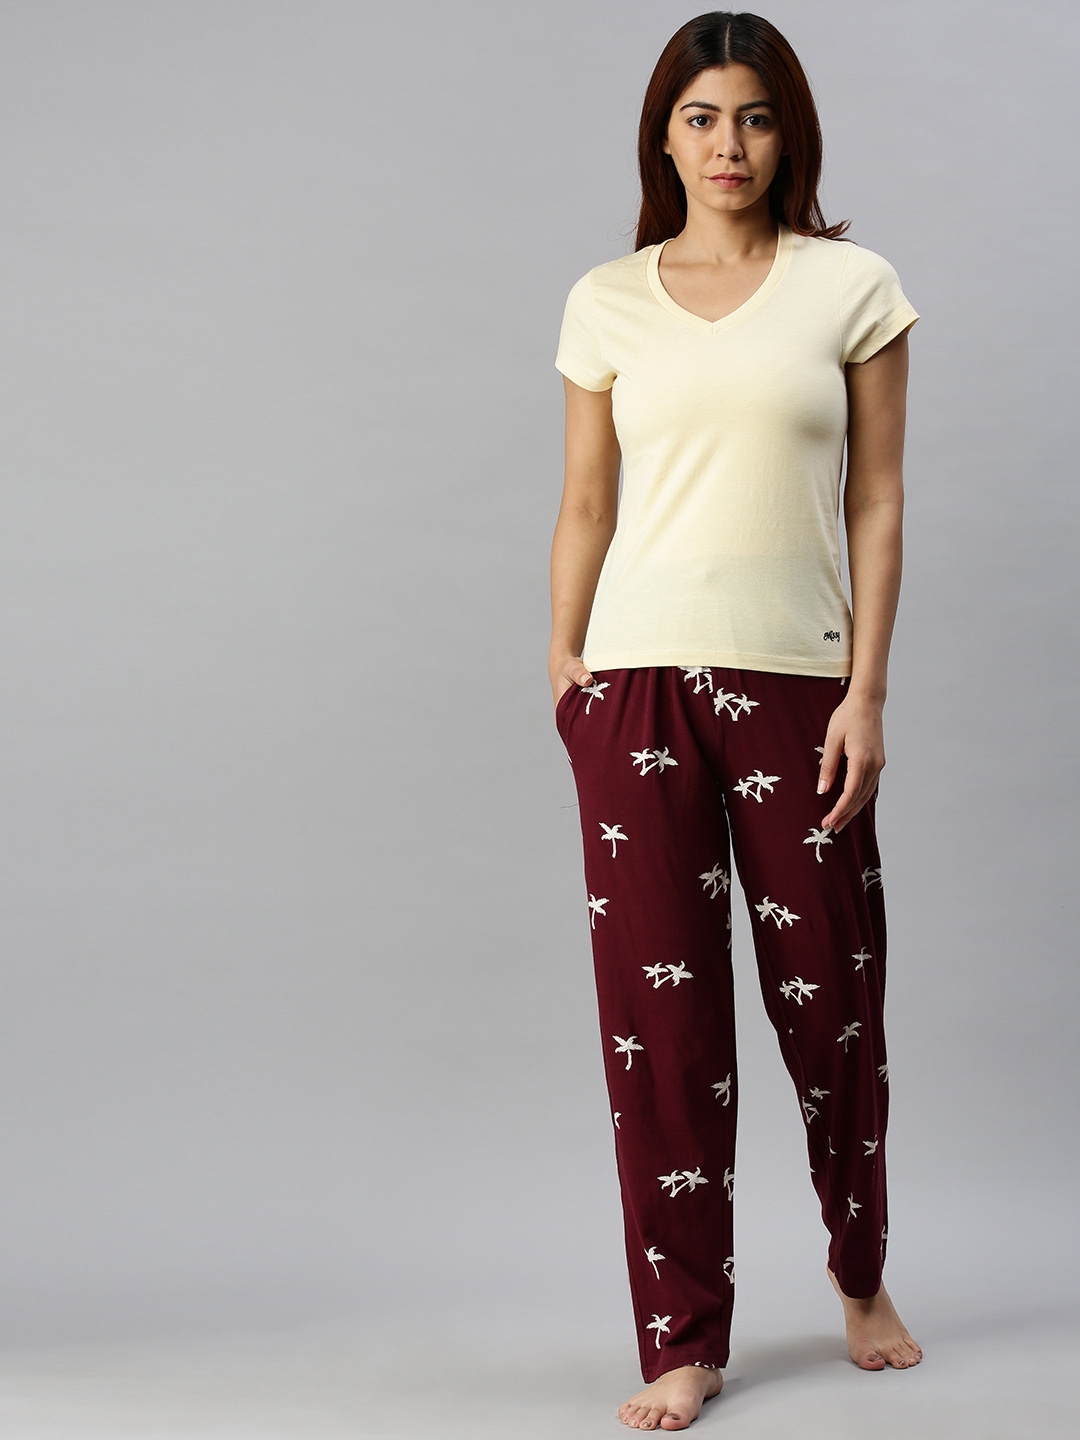 Kryptic | Kryptic Womens 100% Cotton Full Length Lounge Pants - Pack of 2 5